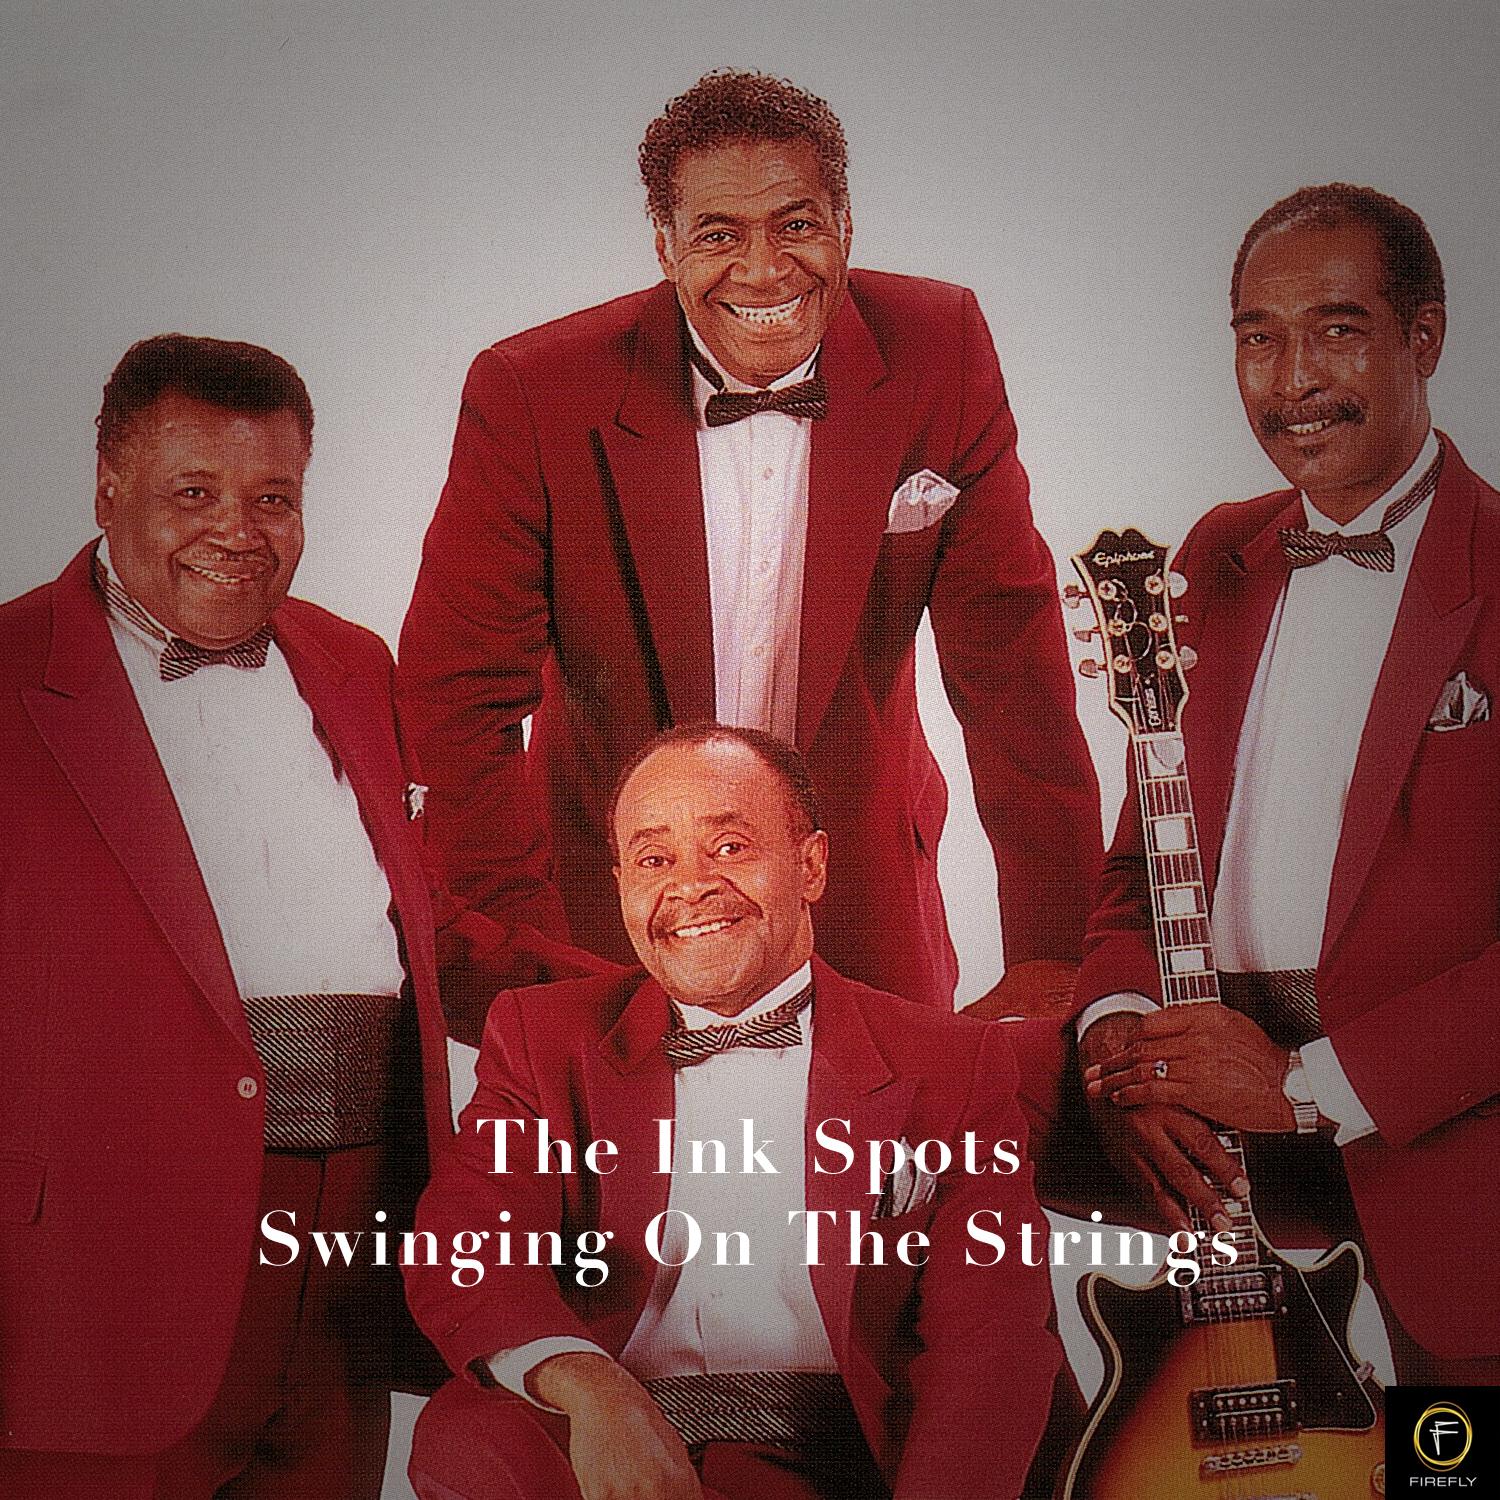 The Ink Spots, Swinging On the Strings